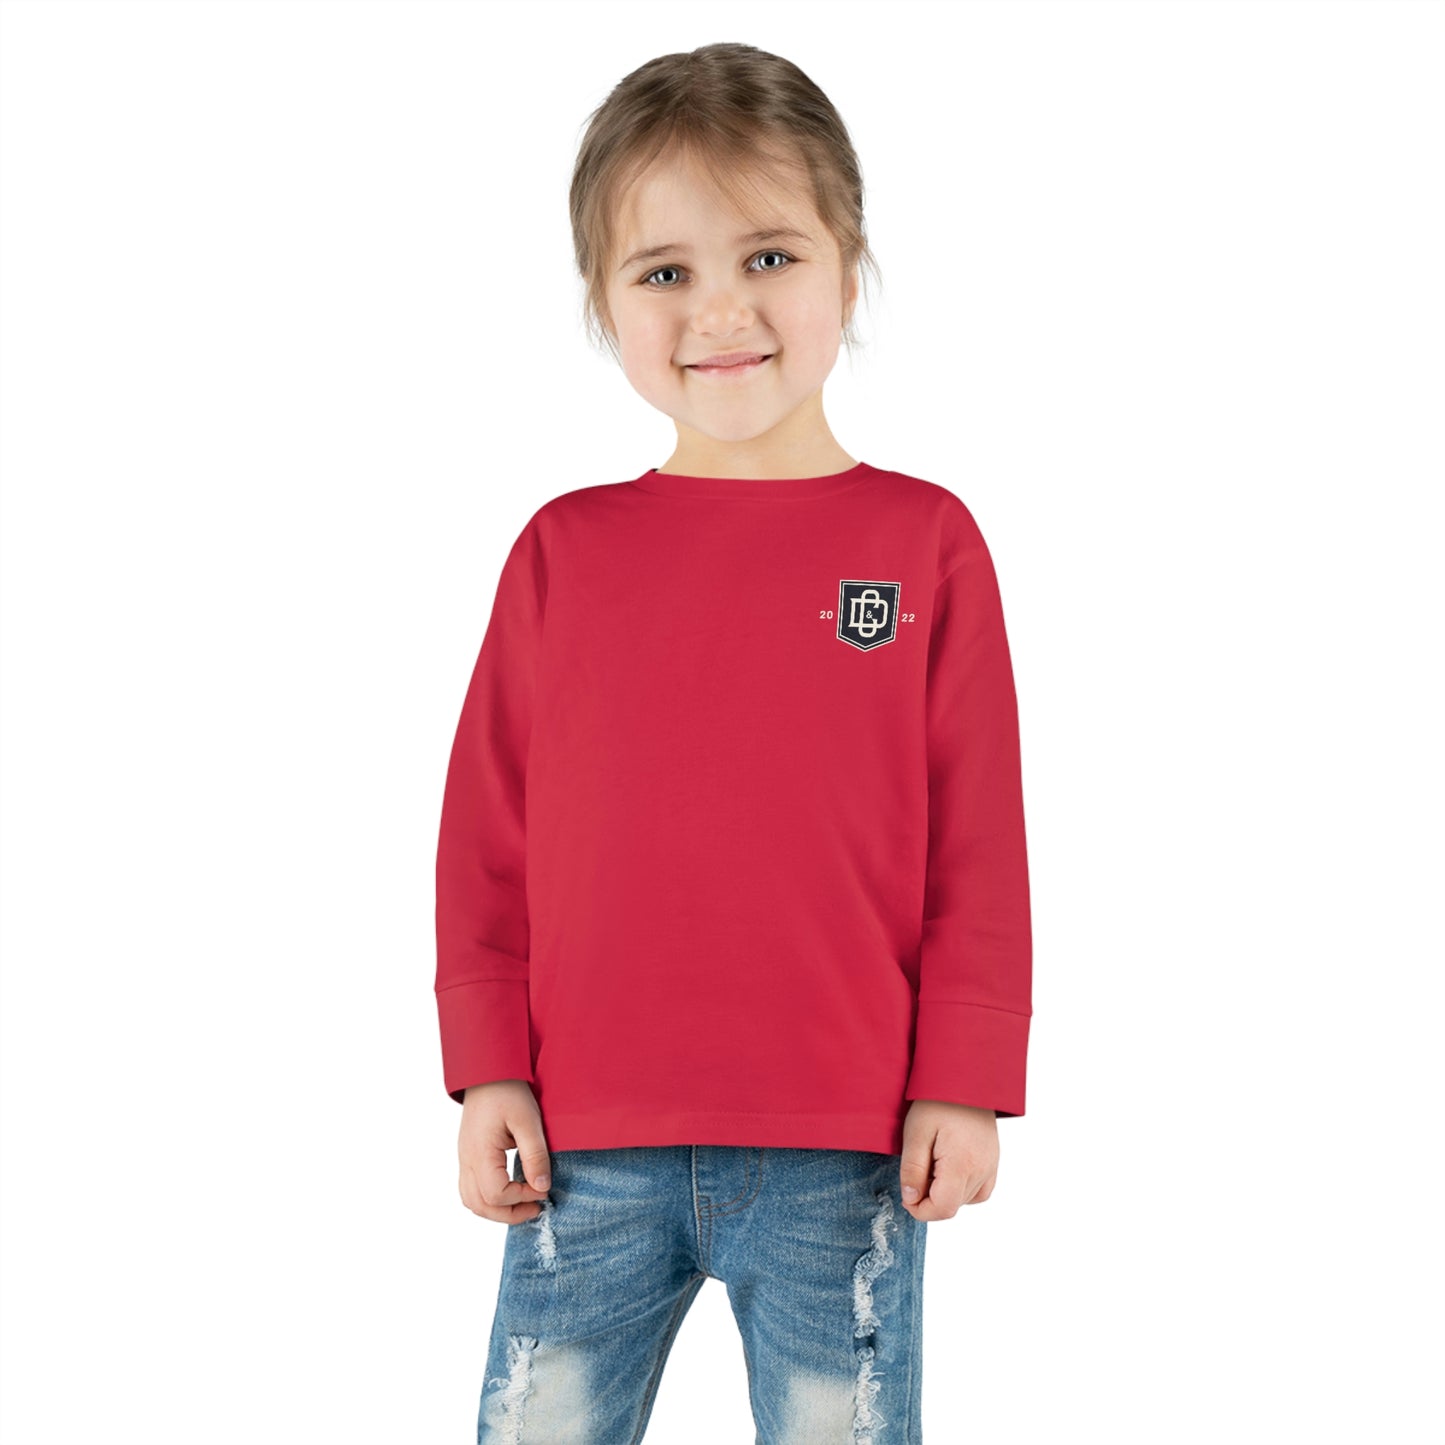 Mind the contents Toddler Long Sleeve Tee